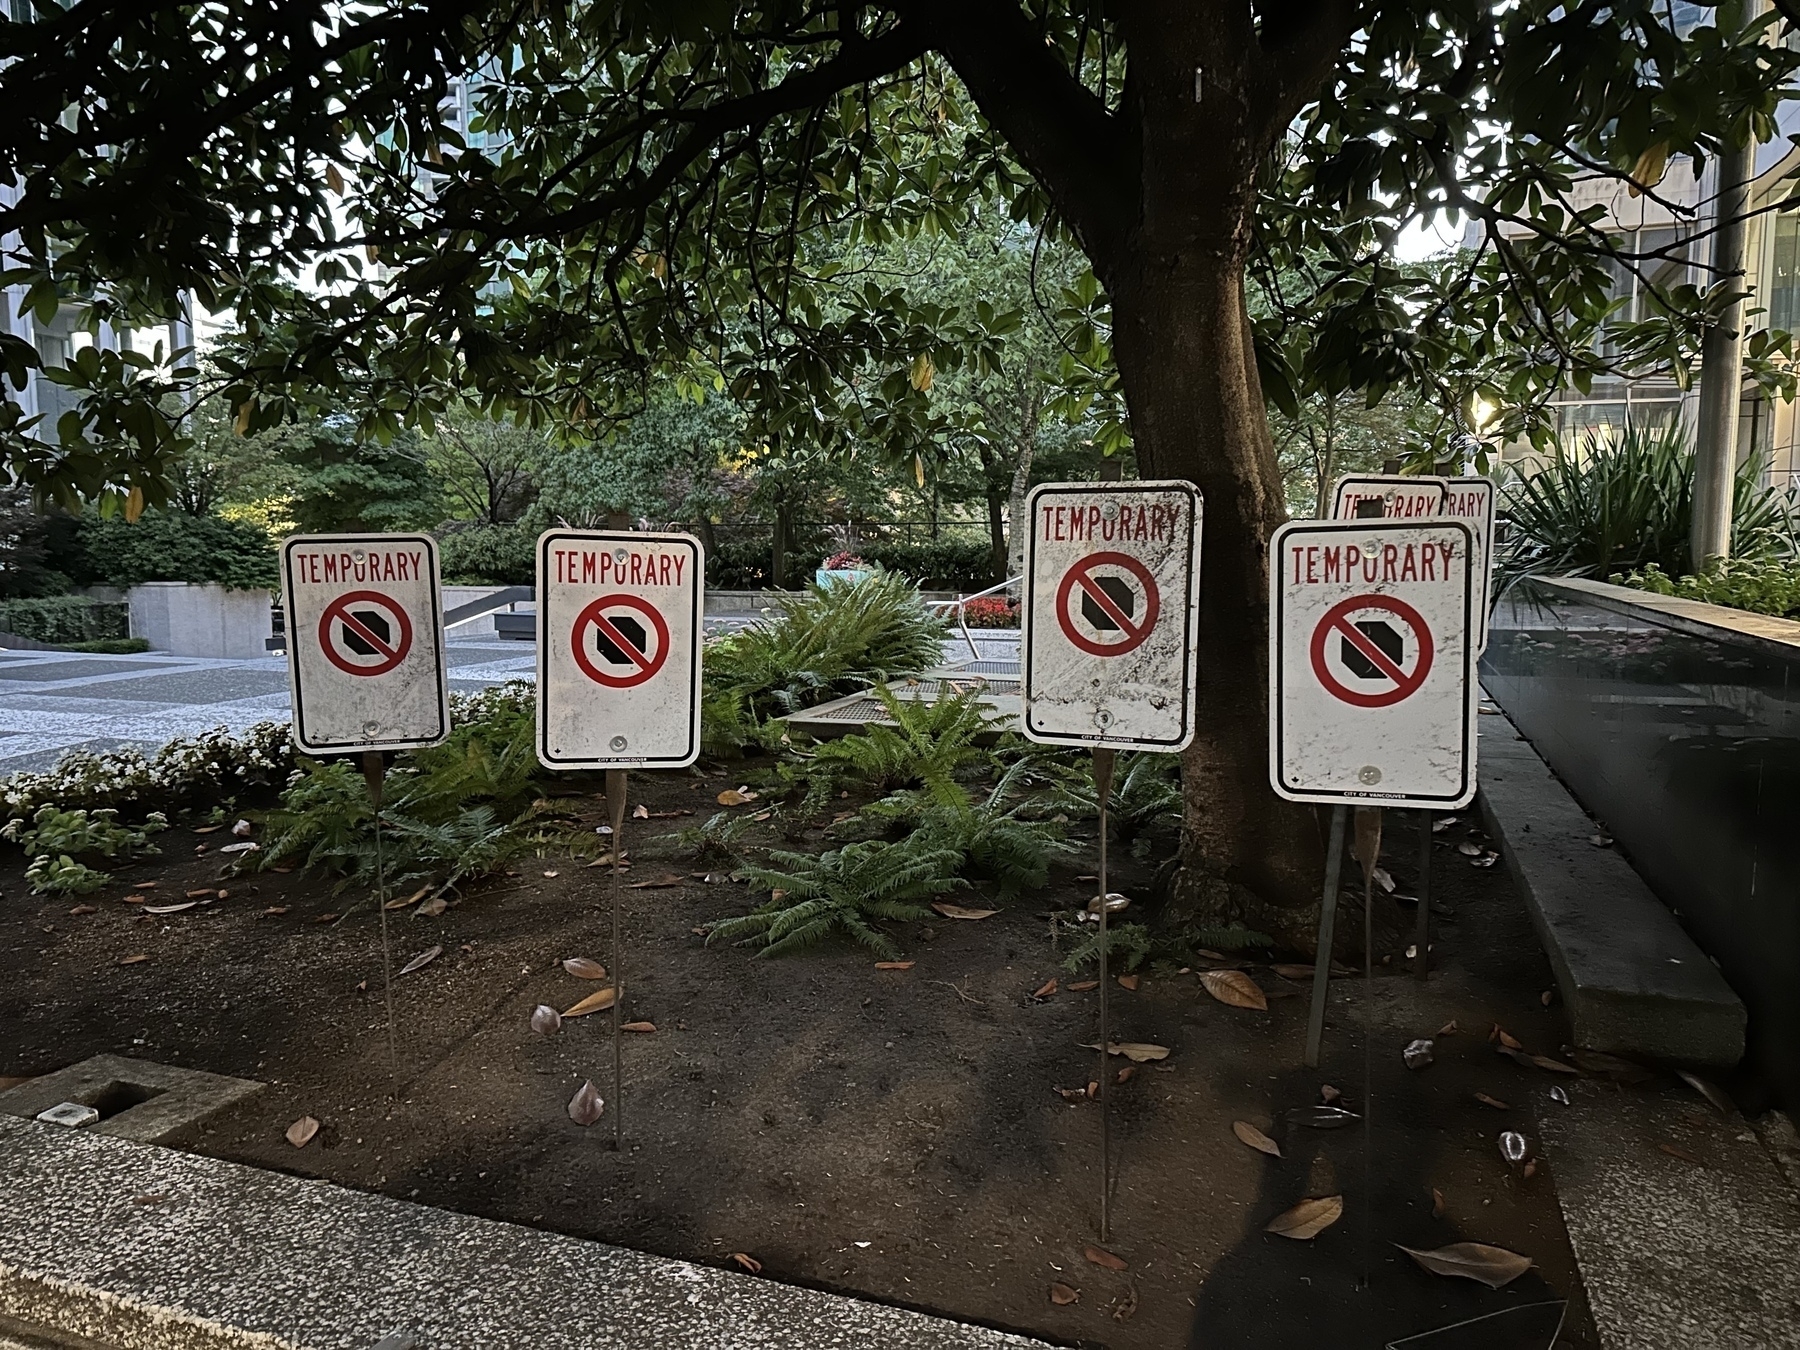 Multiple temporary no stopping signs by a tree.